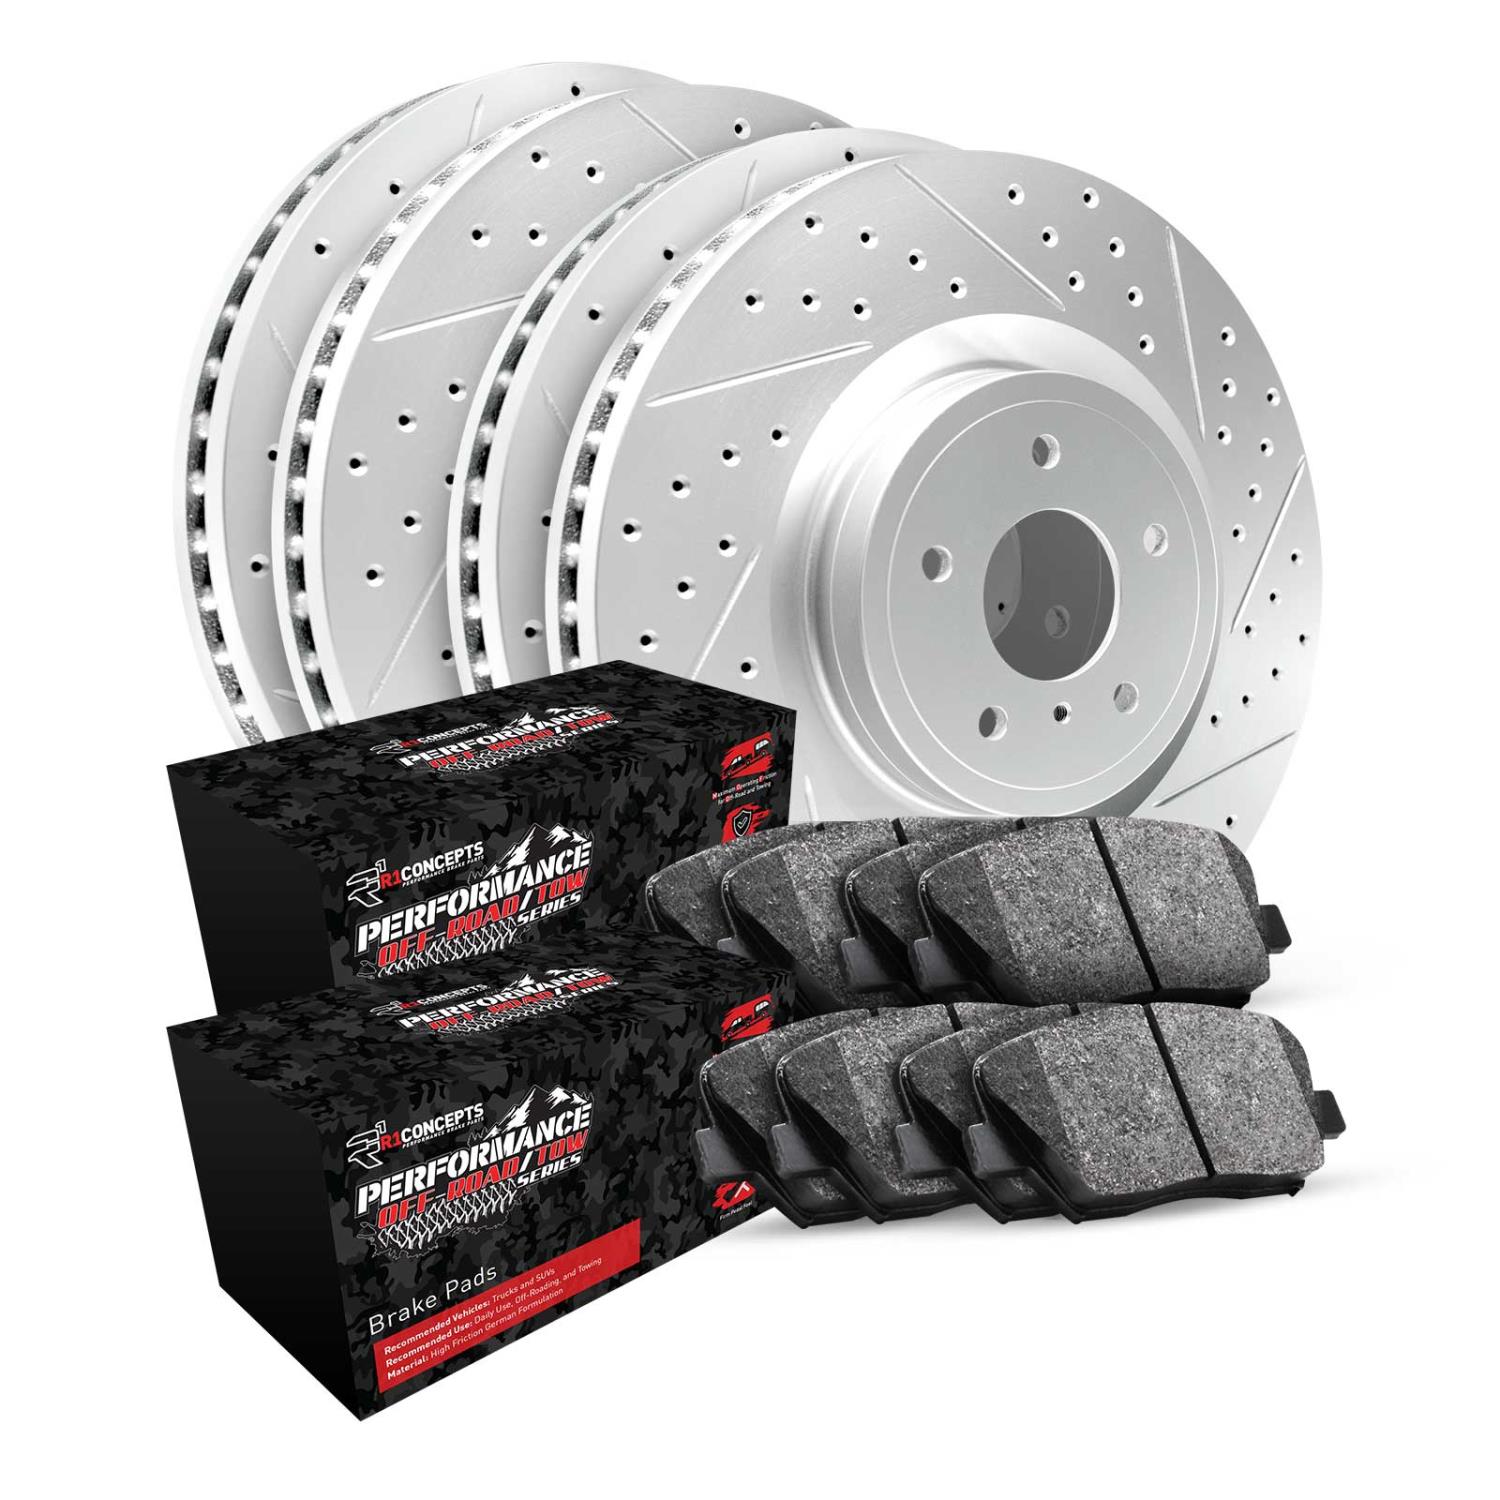 GEO-Carbon Drilled & Slotted Brake Rotor Set w/Performance Off-Road/Tow Pads, 1997-2004 Ford/Lincoln/Mercury/Mazda